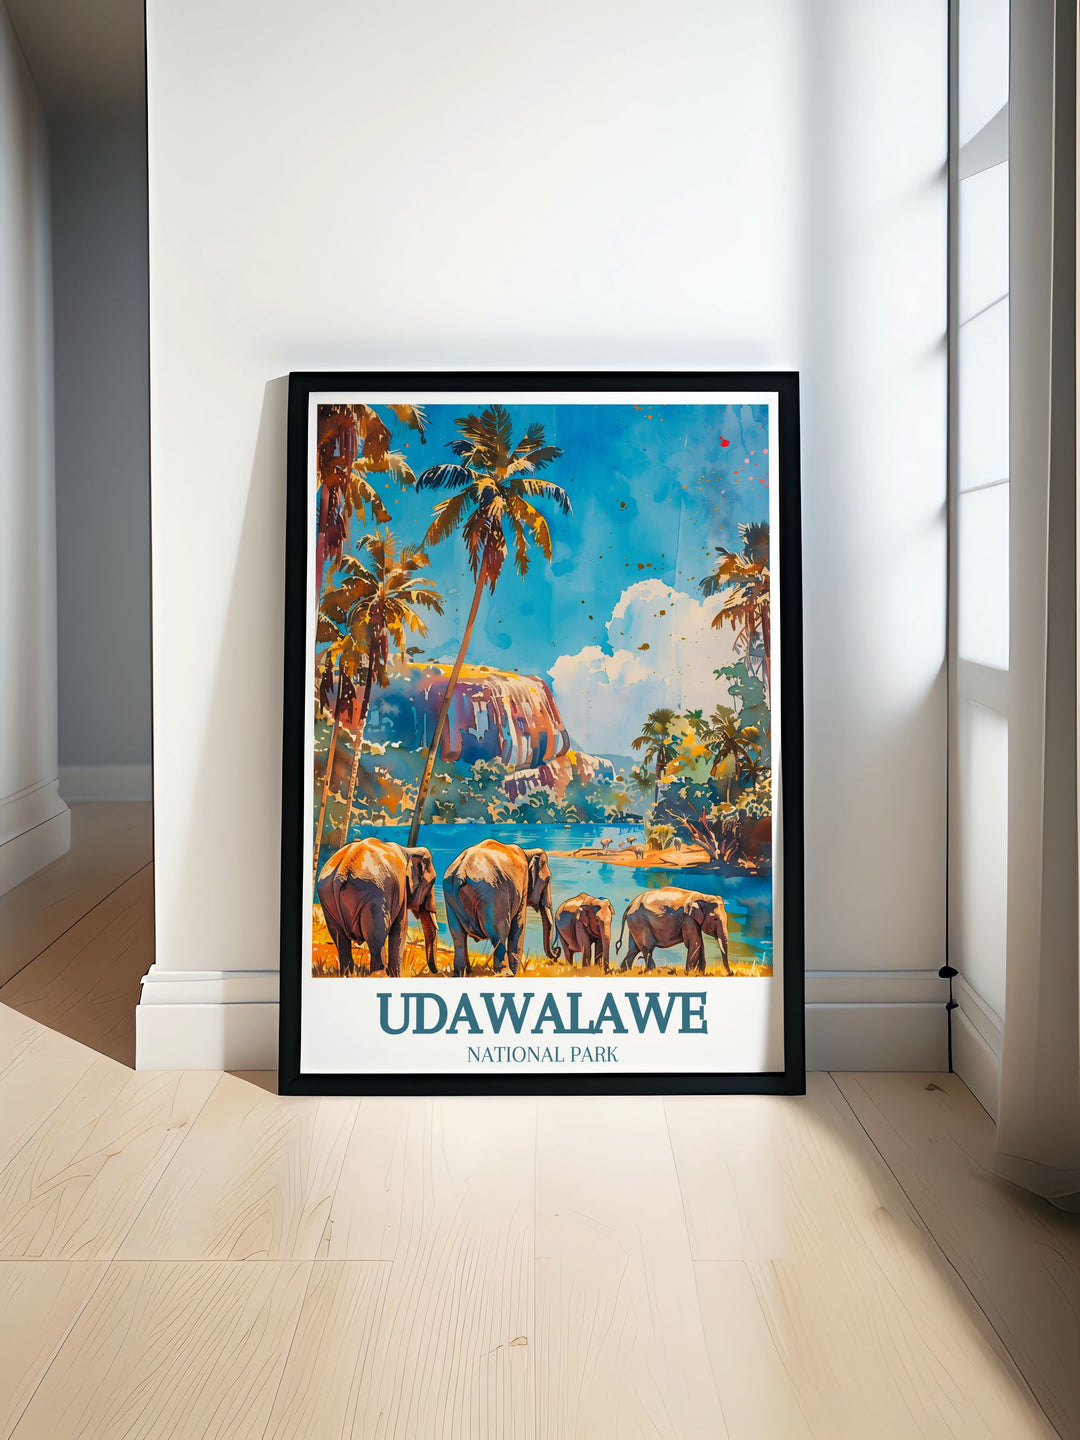 Beautiful Udawalawe Reservoir Walawe River travel poster showcasing vibrant colors and intricate details of Sri Lankas national park perfect for adding a touch of nature and elegance to your home decor or as a gift for nature lovers and adventure enthusiasts.